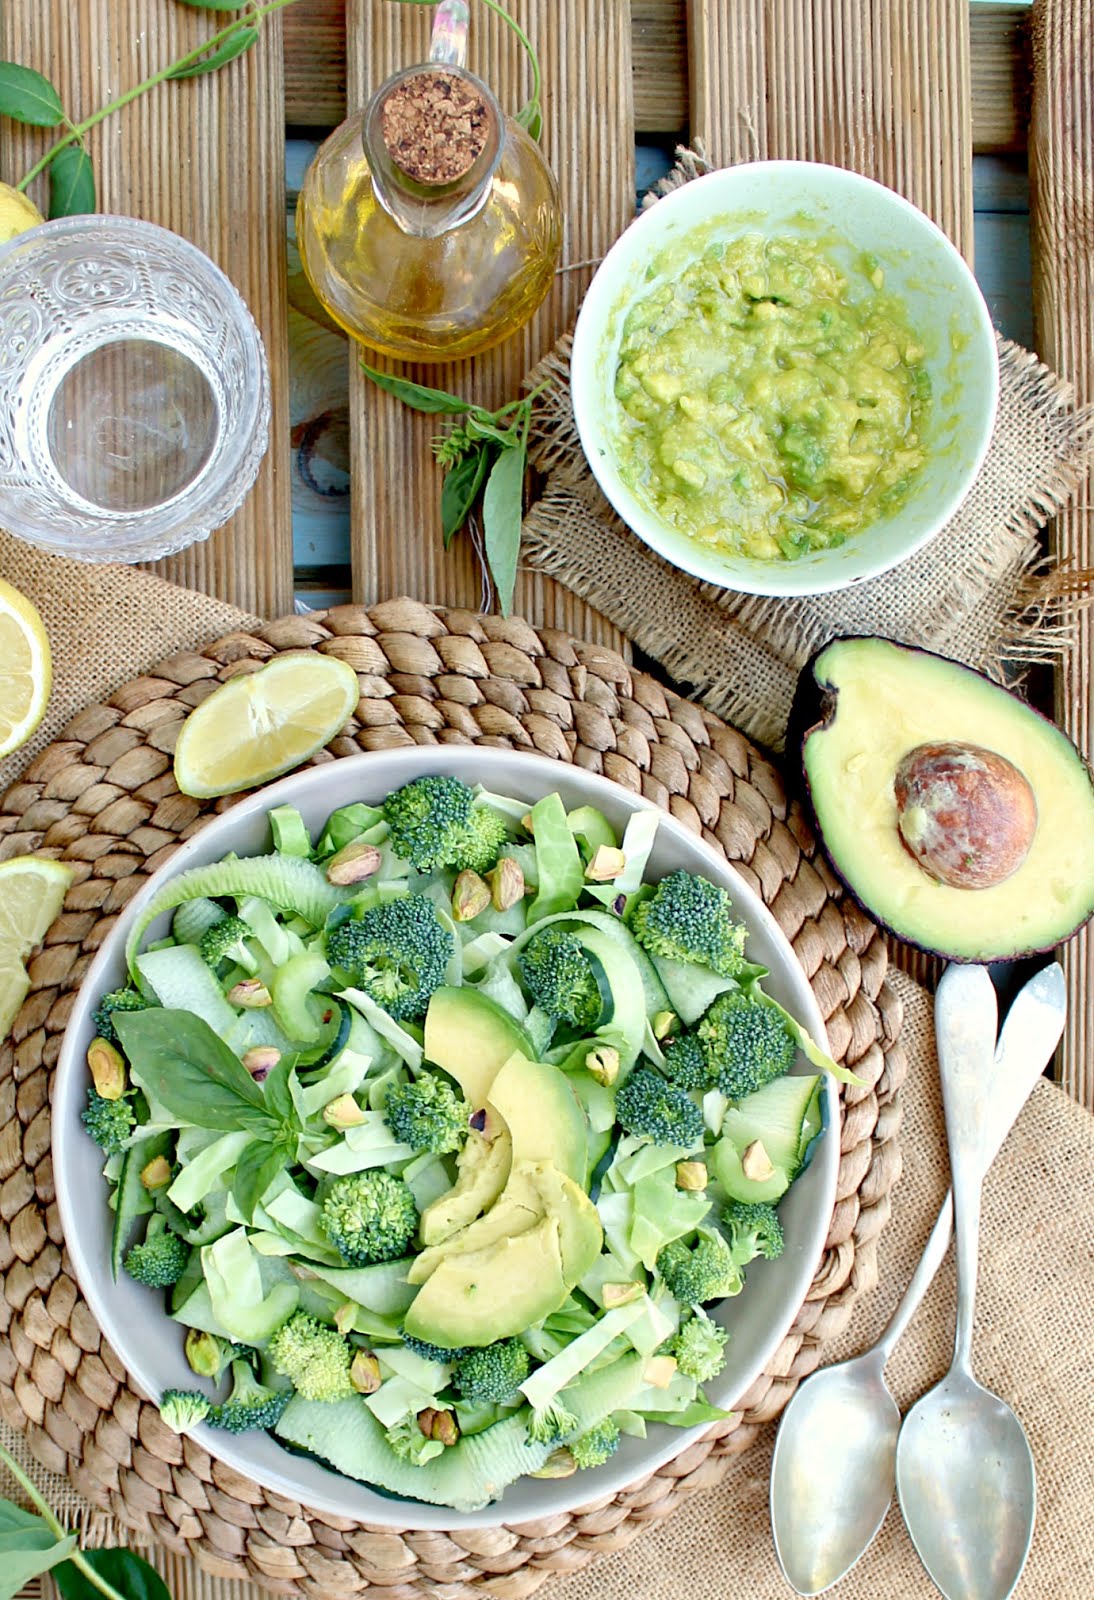 Green Monster Detox Salad: full of healthy stuff to help you de-bloat after too many indulgences!